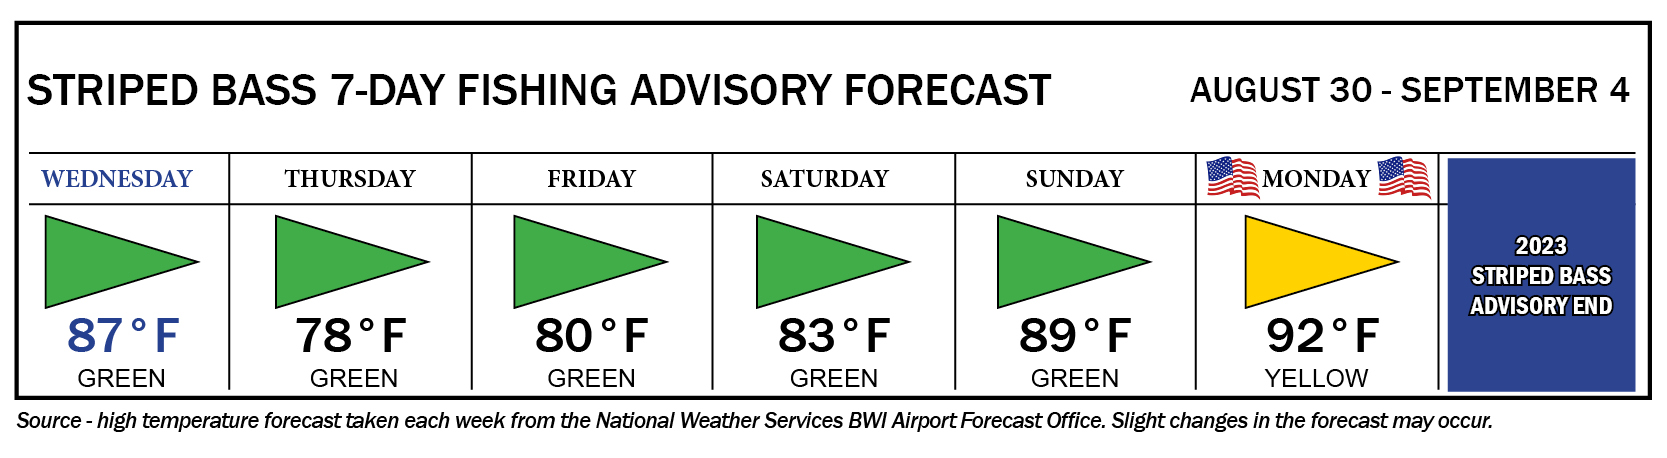 Image of weekly forecast August 9-15 with green flags Wednesday through Friday, yellow flags Saturday and Sunday, and green flags Monday and Tuesday